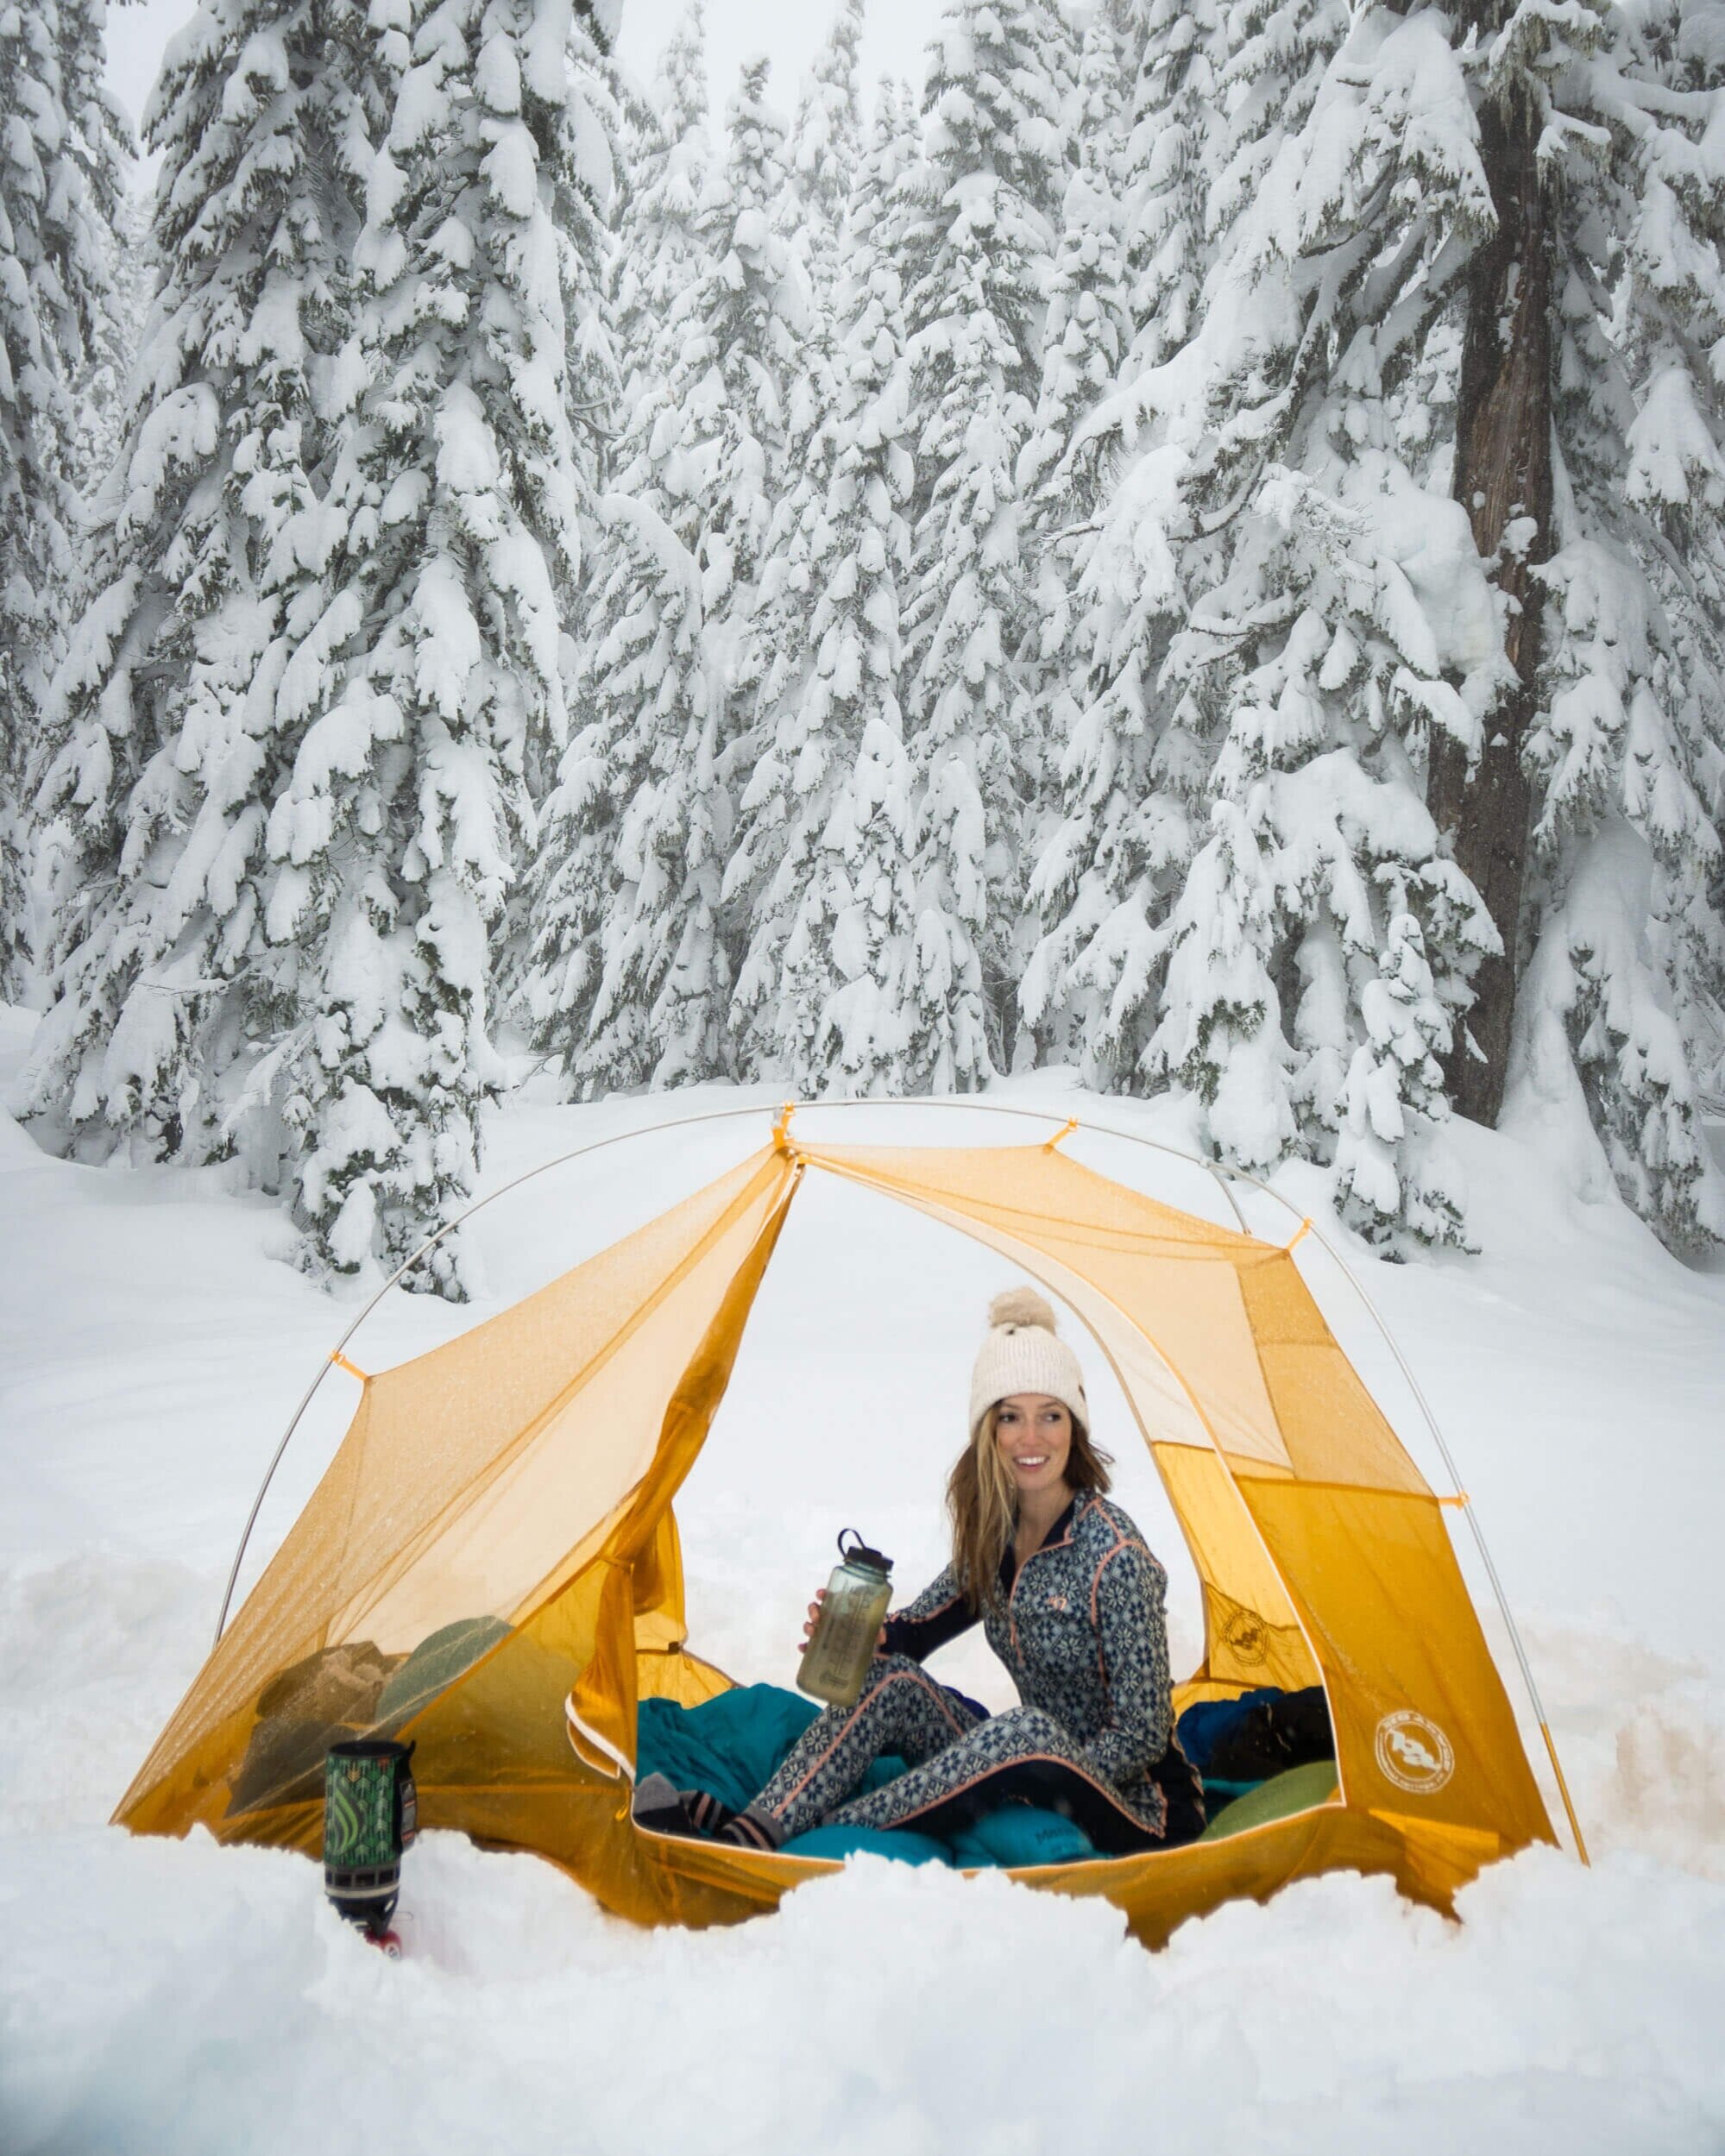 5 Tips for Staying Warm when Camping in the Cold